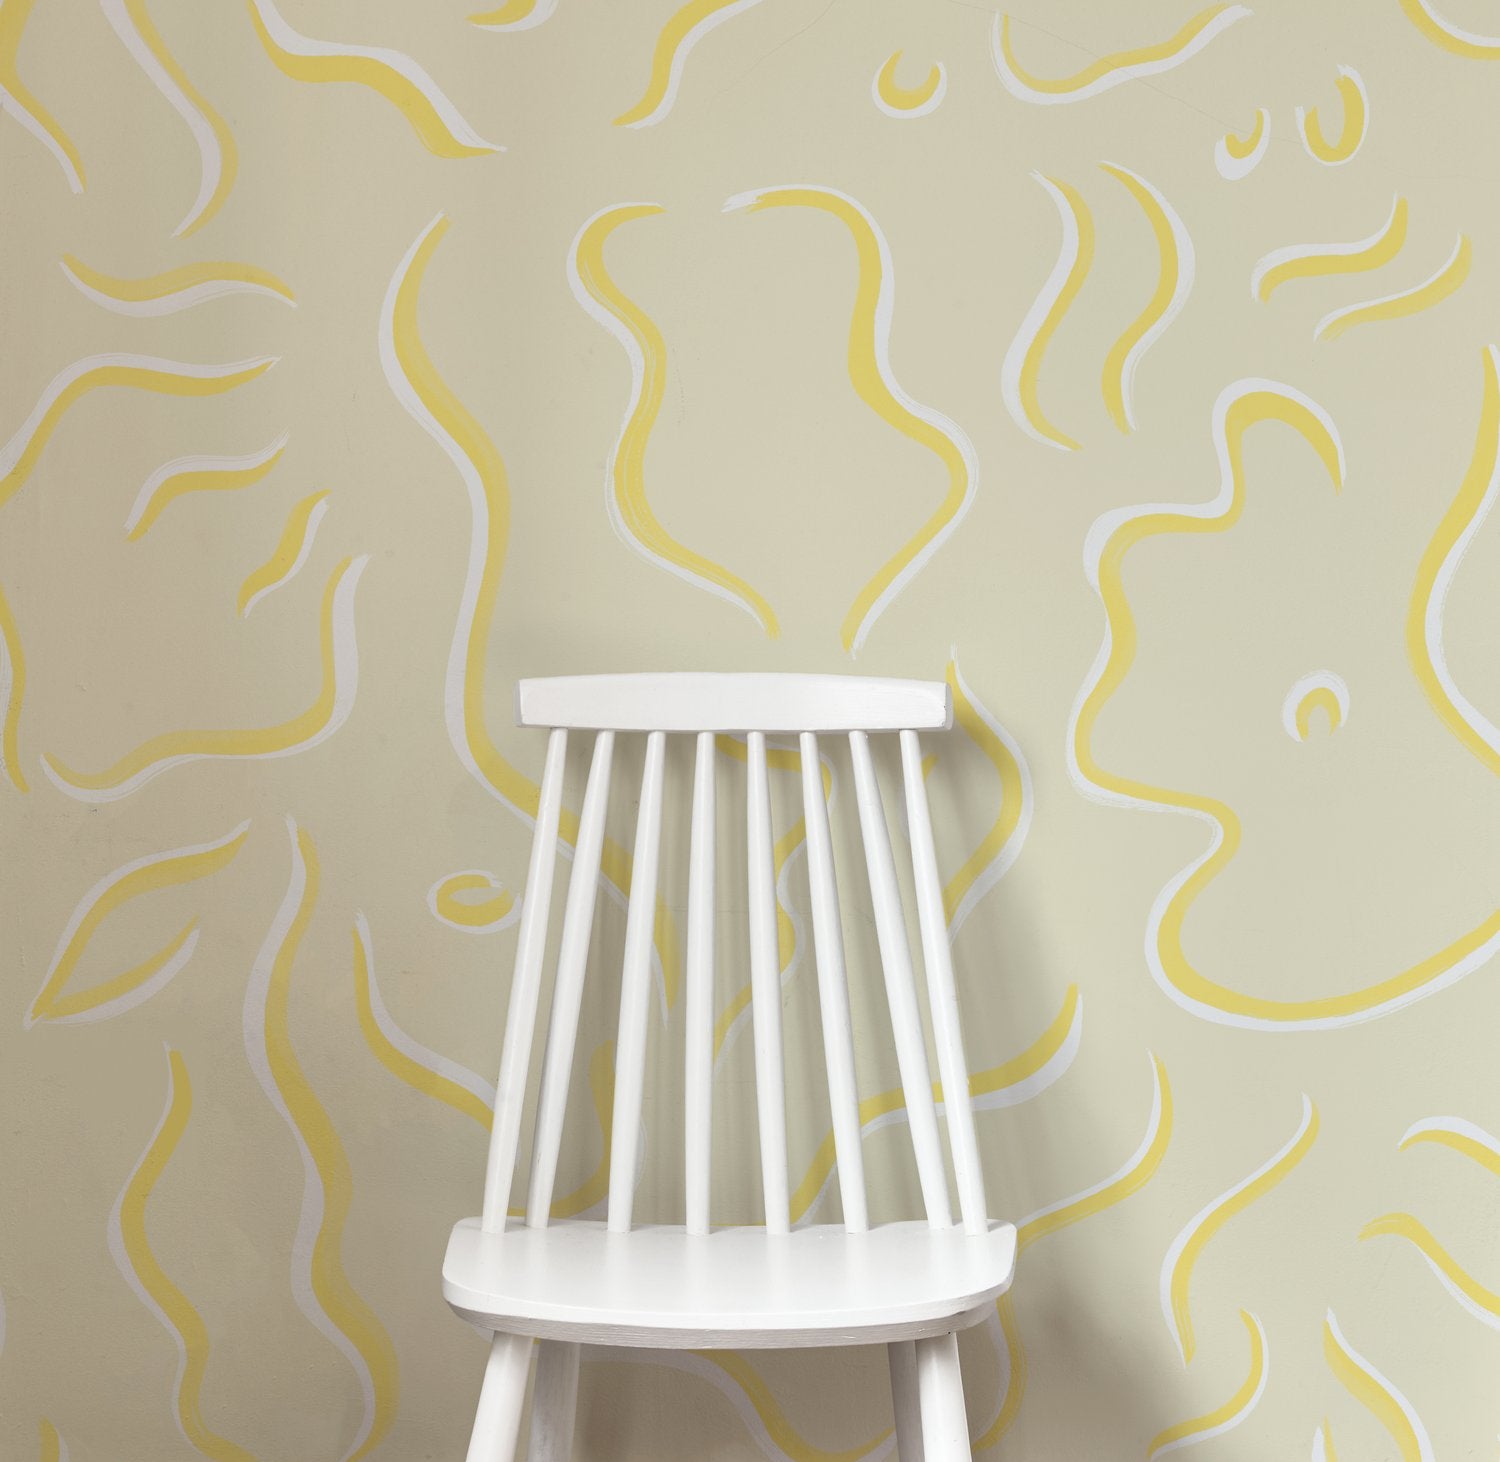 A wooden chair stands in front of a wall papered in a painterly botanical print in yellow and white on a tan field.